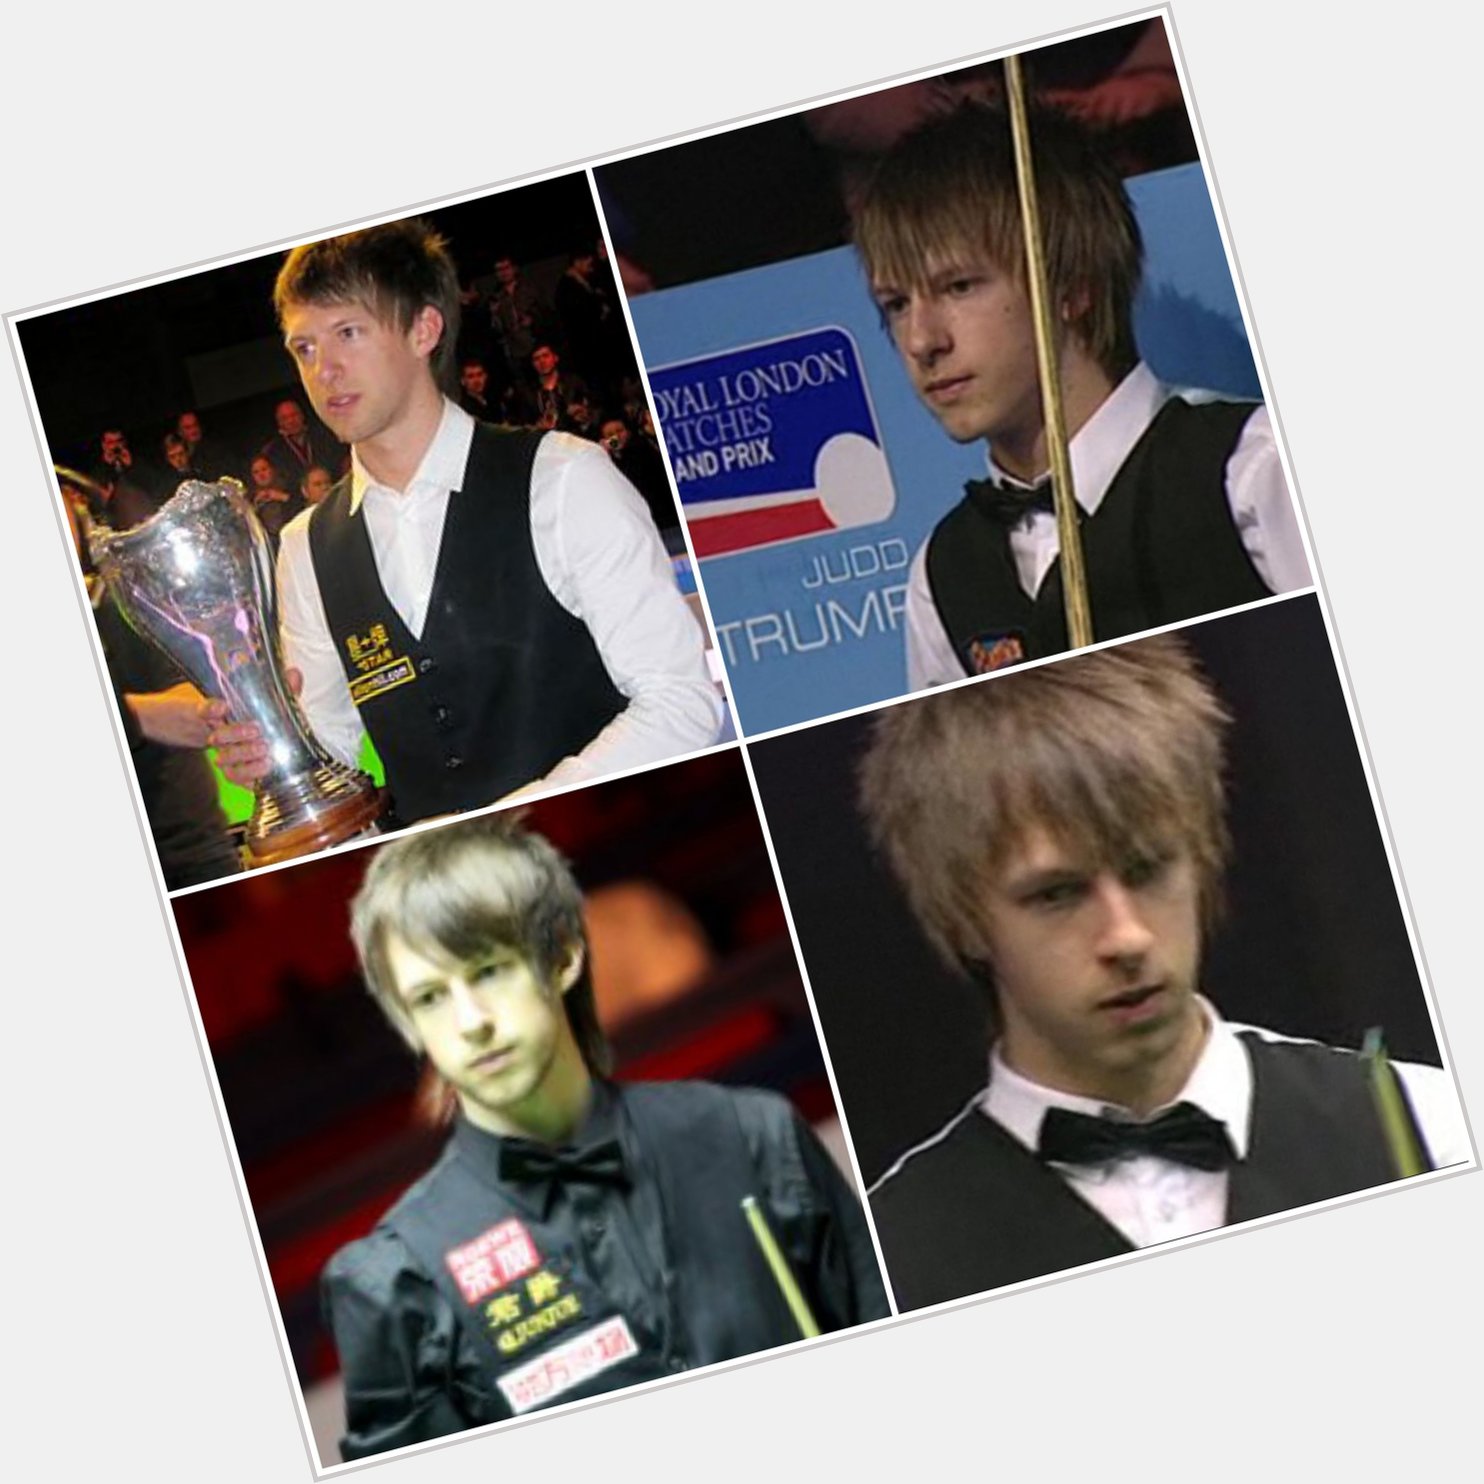 Happy Birthday to the Juddernaut Judd Trump 29 today 
Have a good one Judd       